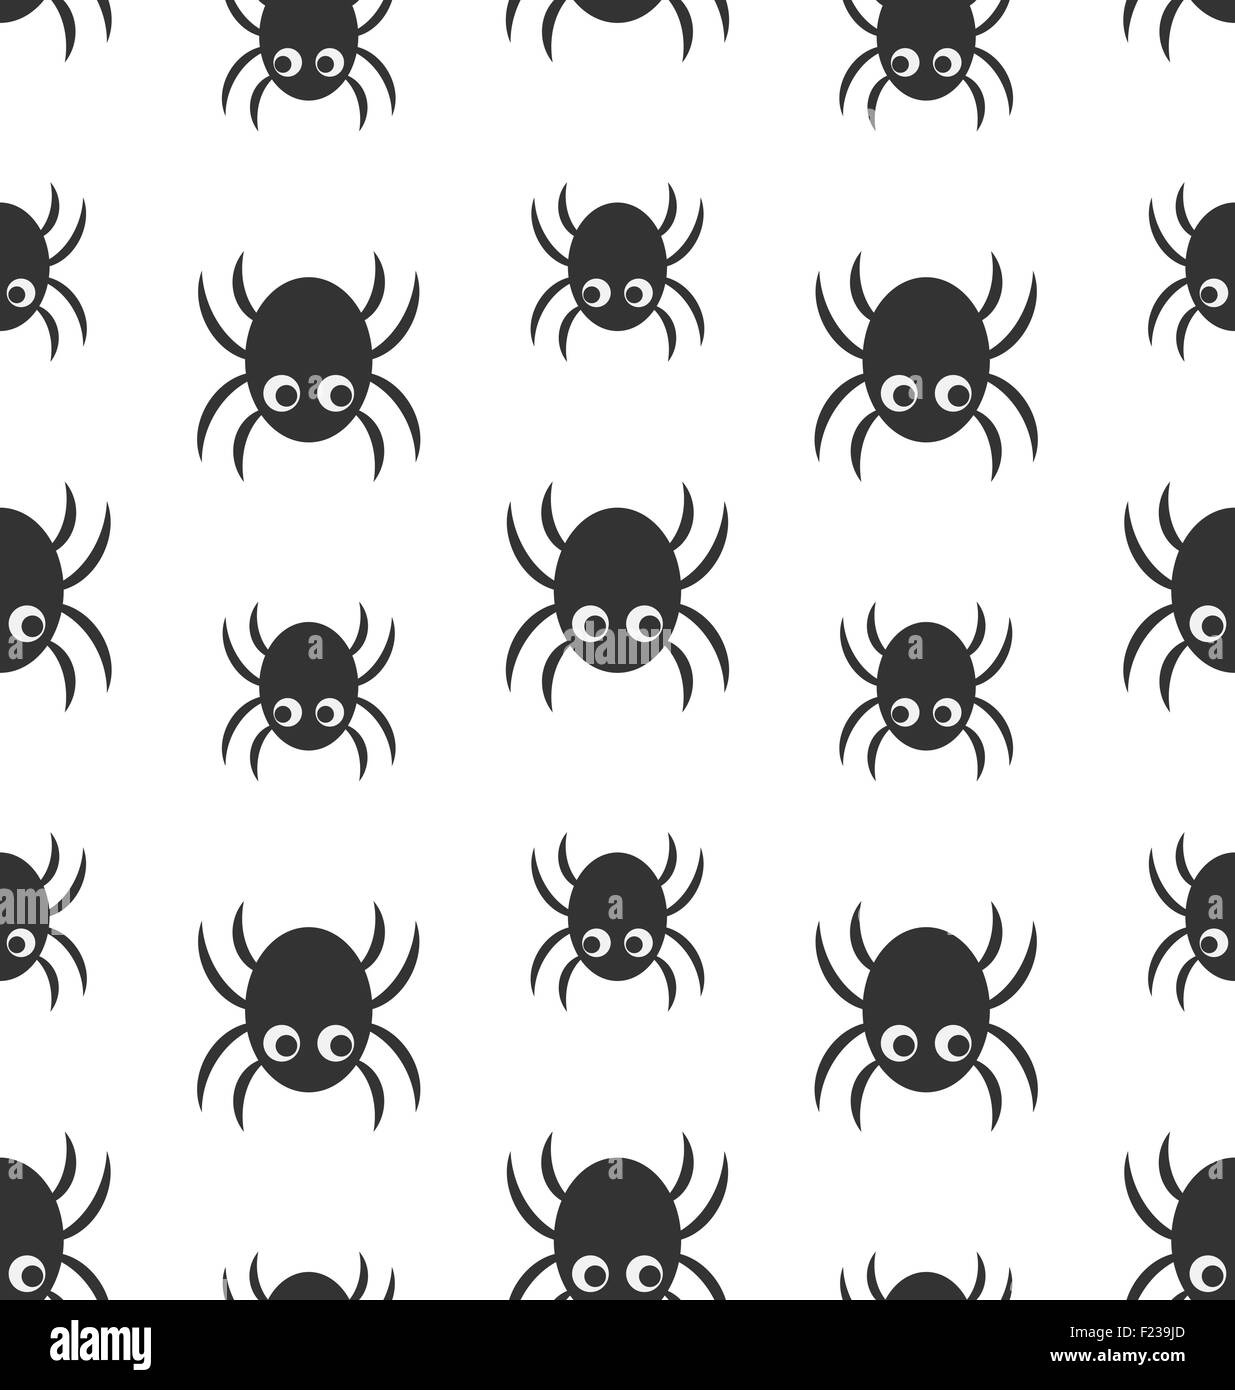 Spider Silhouette on white background Stock Vector